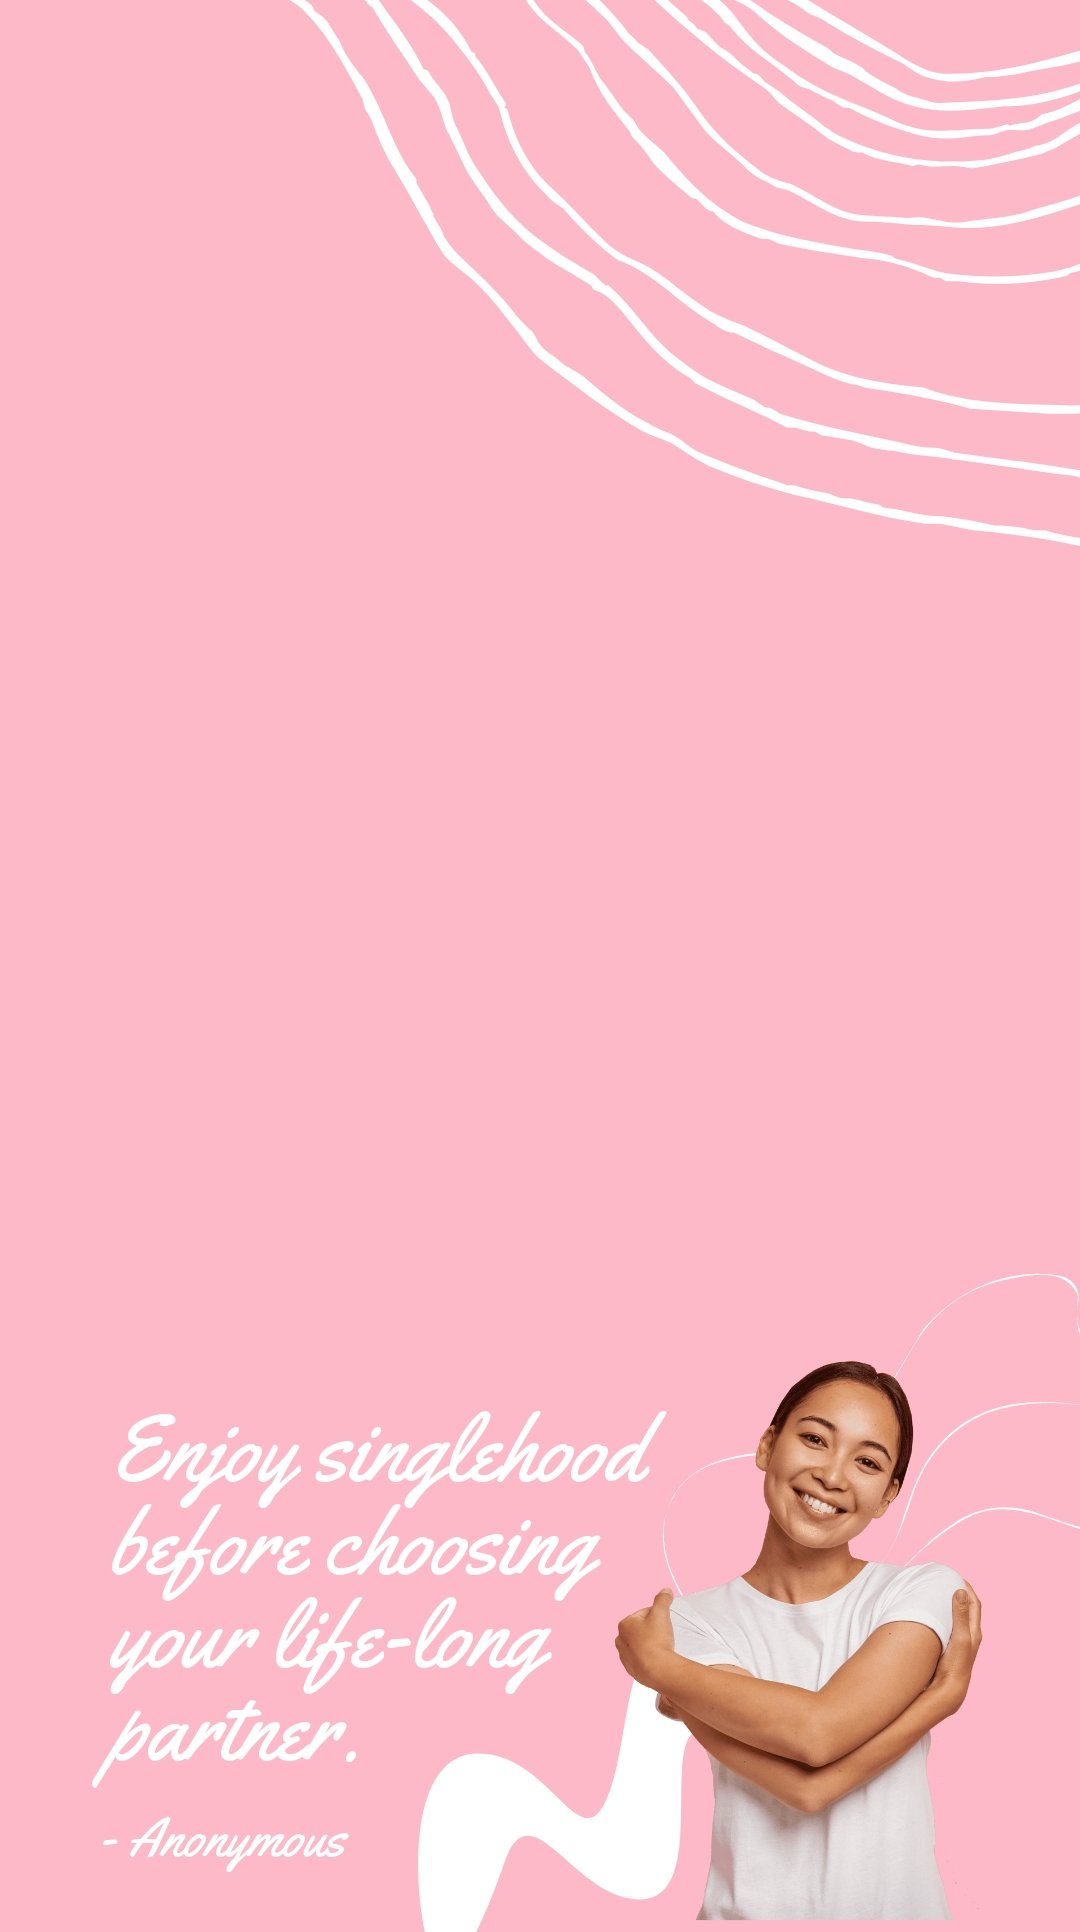 Free Singles Day Quote Snapchat Geofilter Template